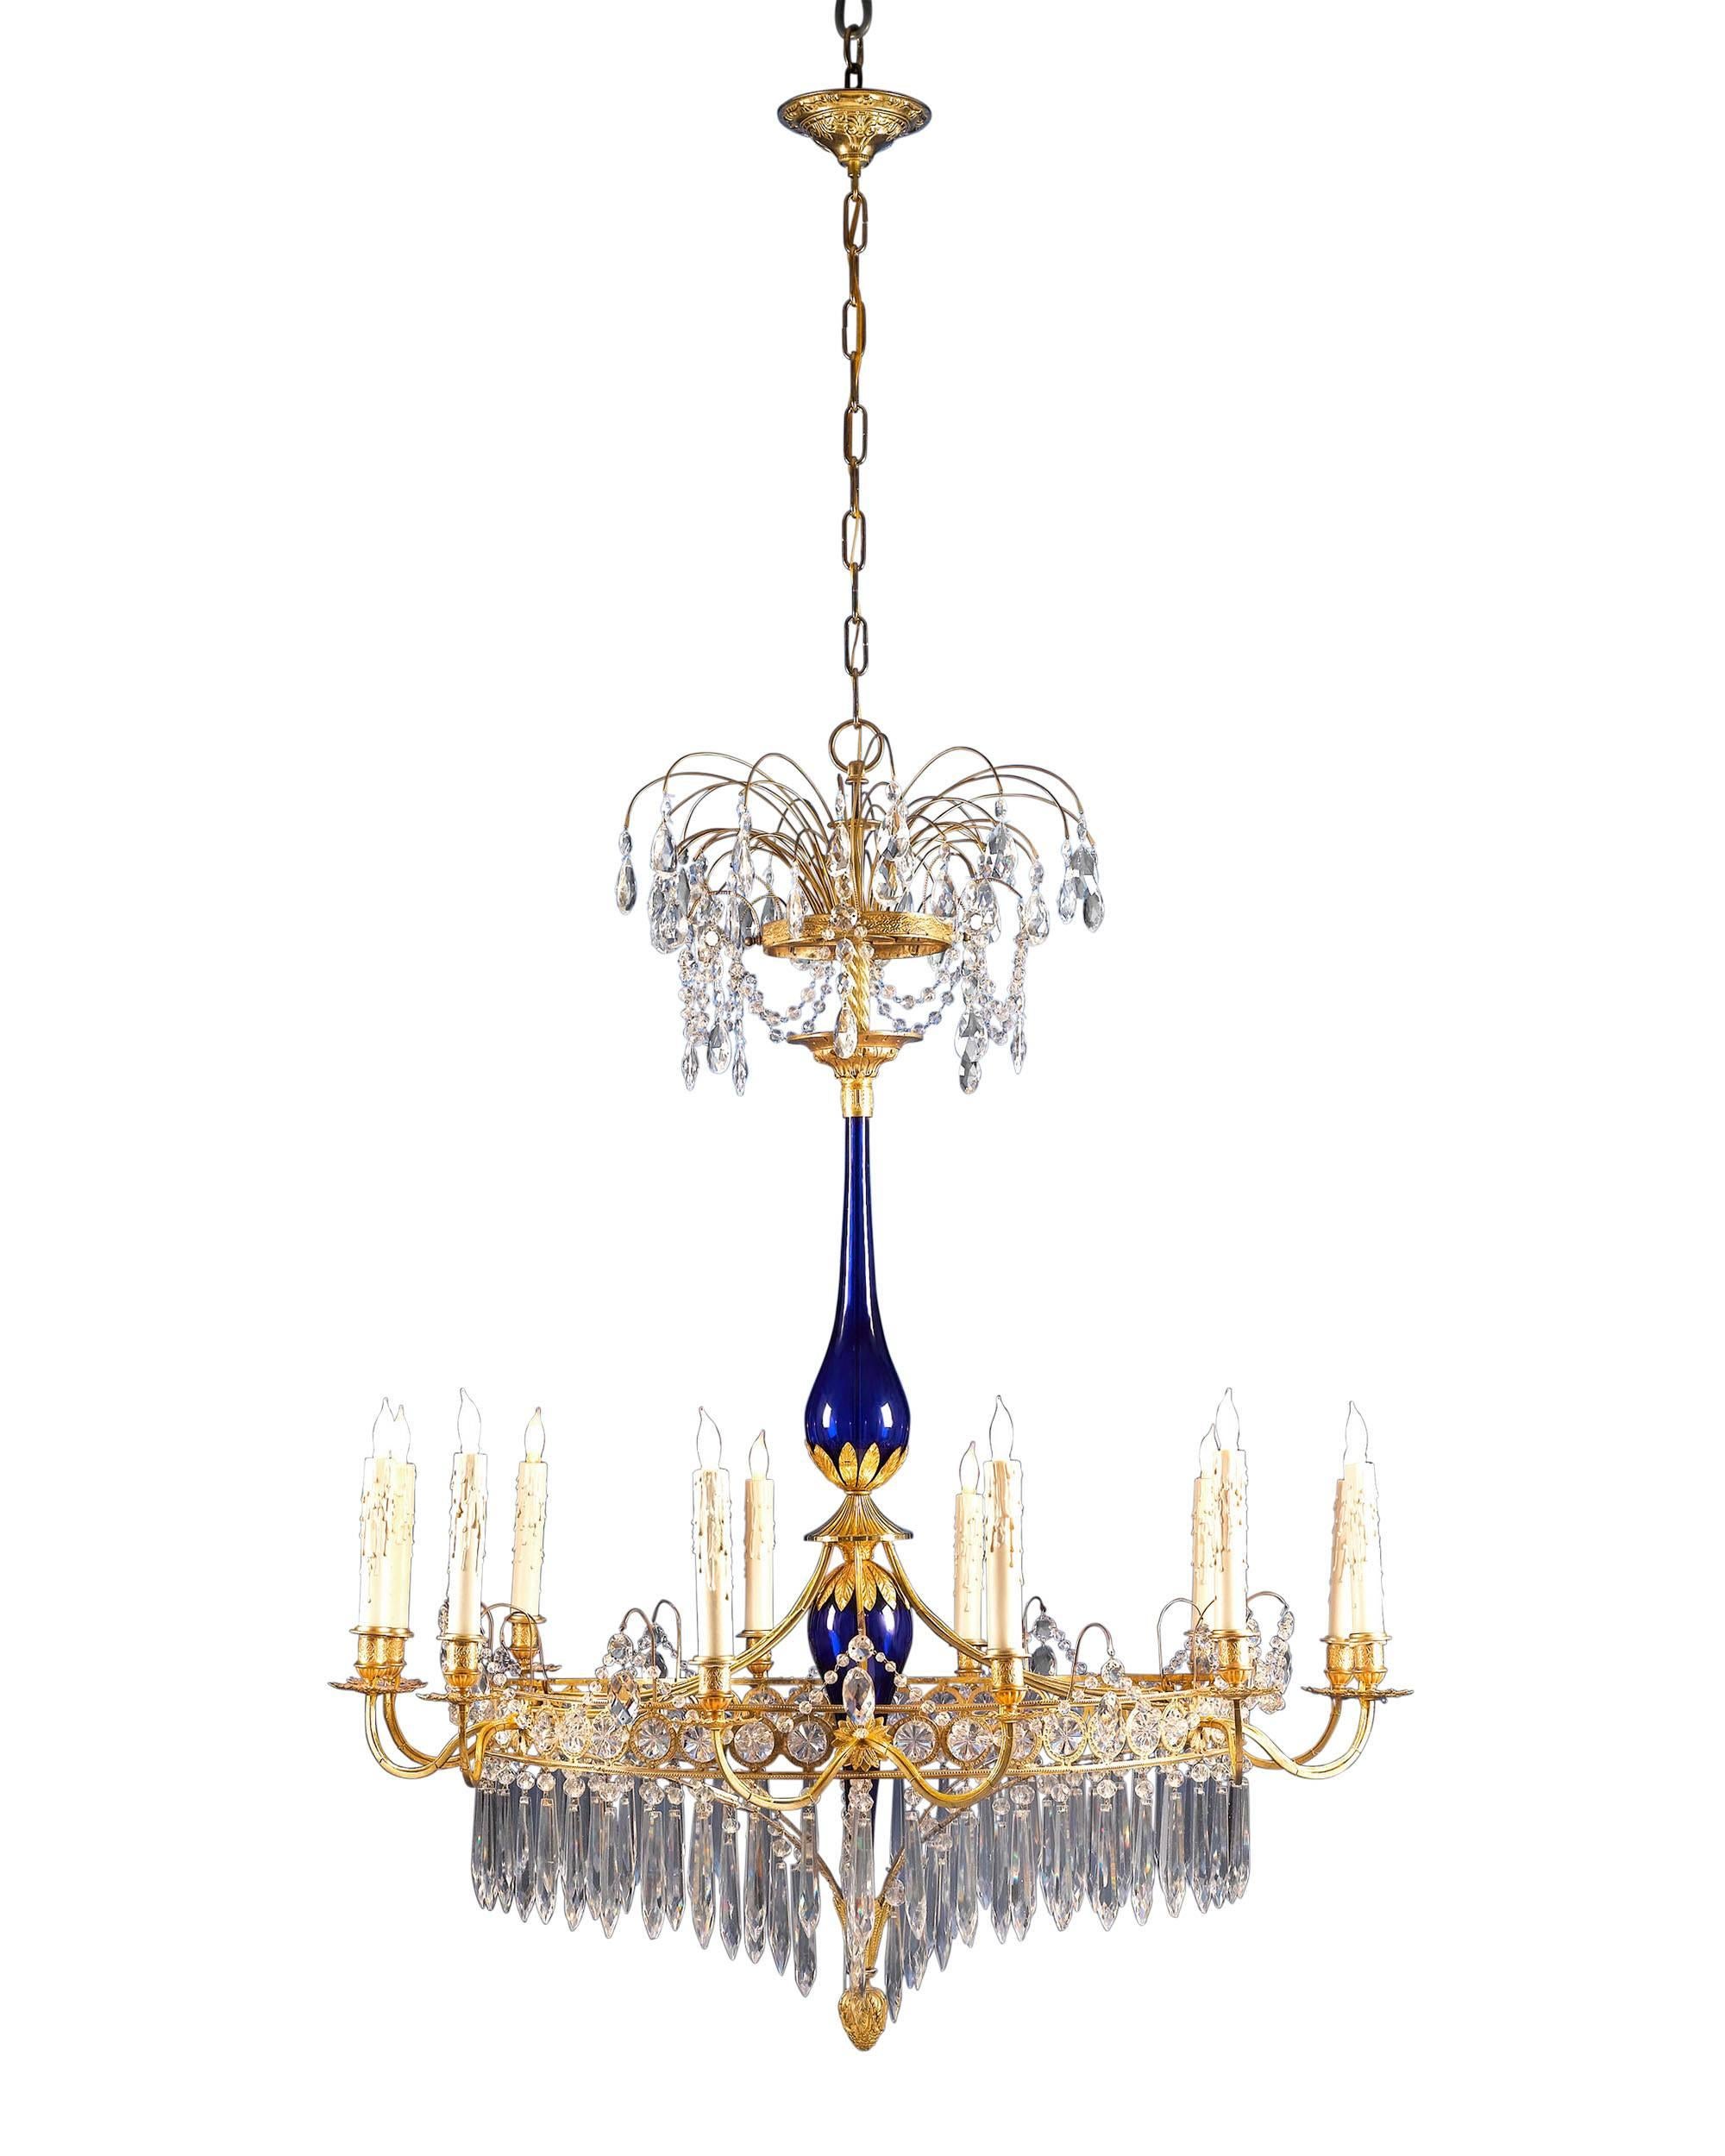 This exceptionally rare, Russian Neoclassical chandelier is the epitome of early 19th century luxury and style. Crafted in Saint Petersburg of mercury-gilded bronze, cobalt blue glass and intricately cut crystal in an exuberant fountain motif, this